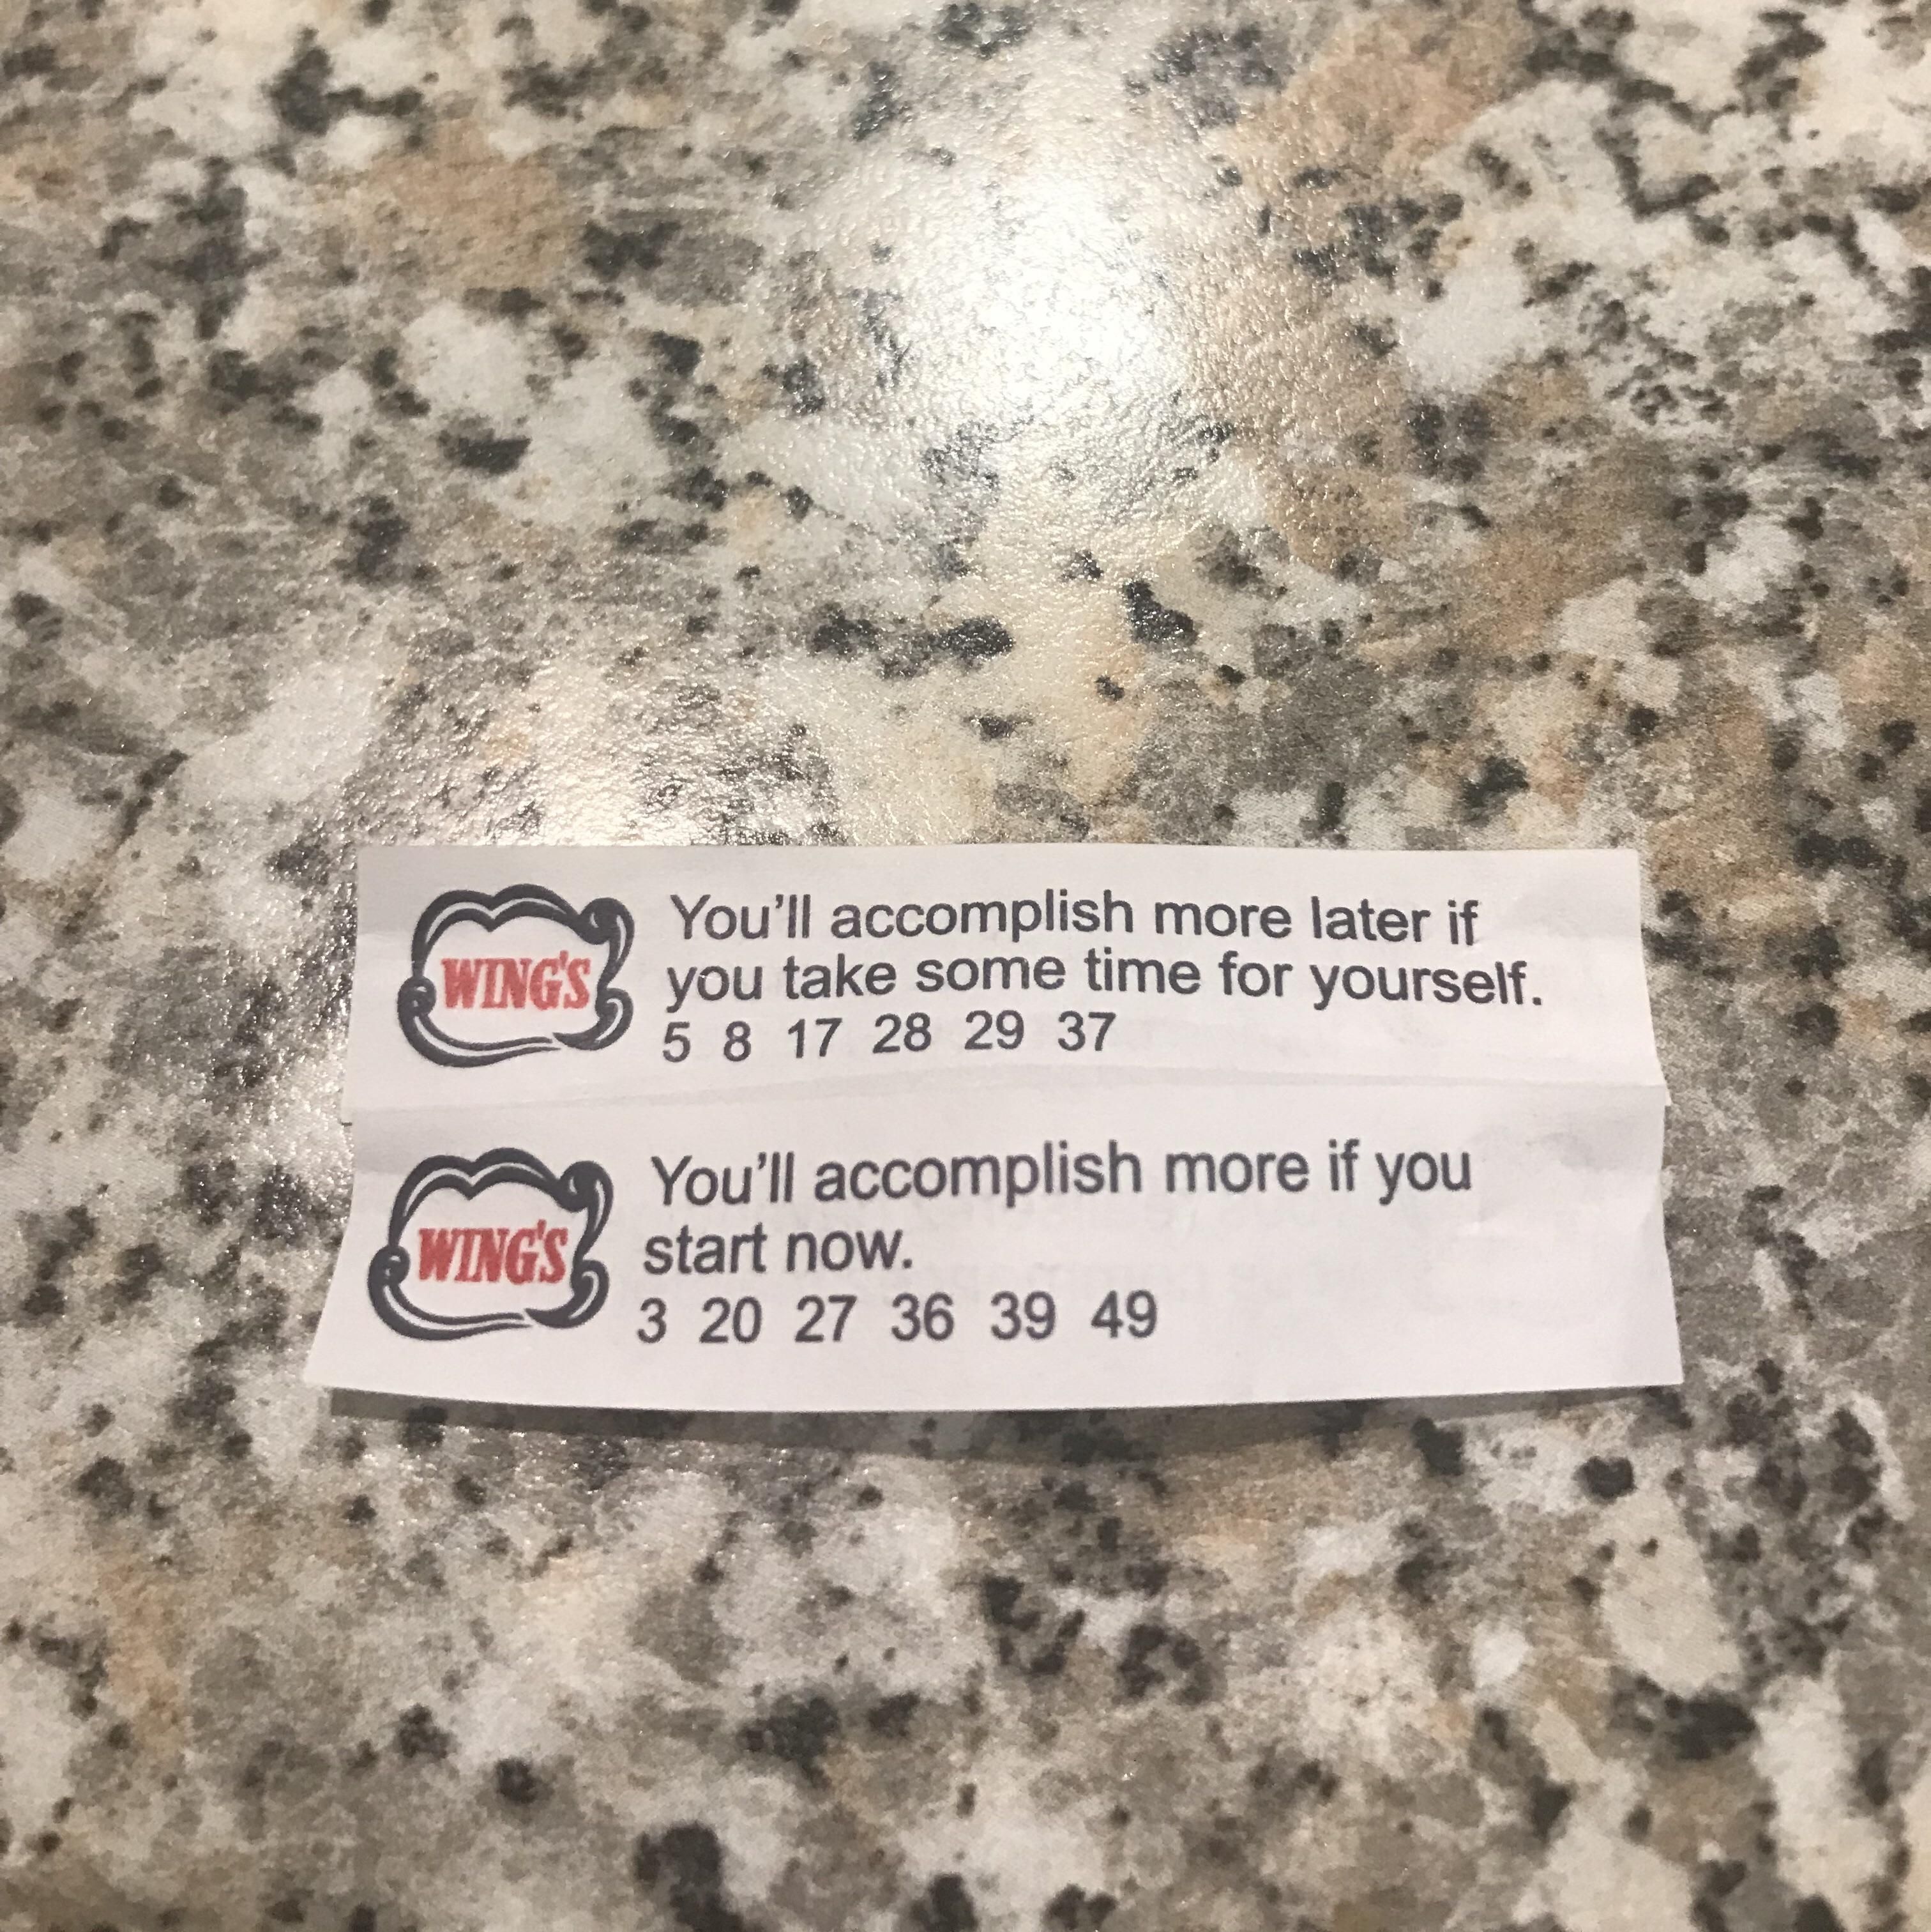 Got two fortunes in my cookie. I’ve never been more conflicted in my life.